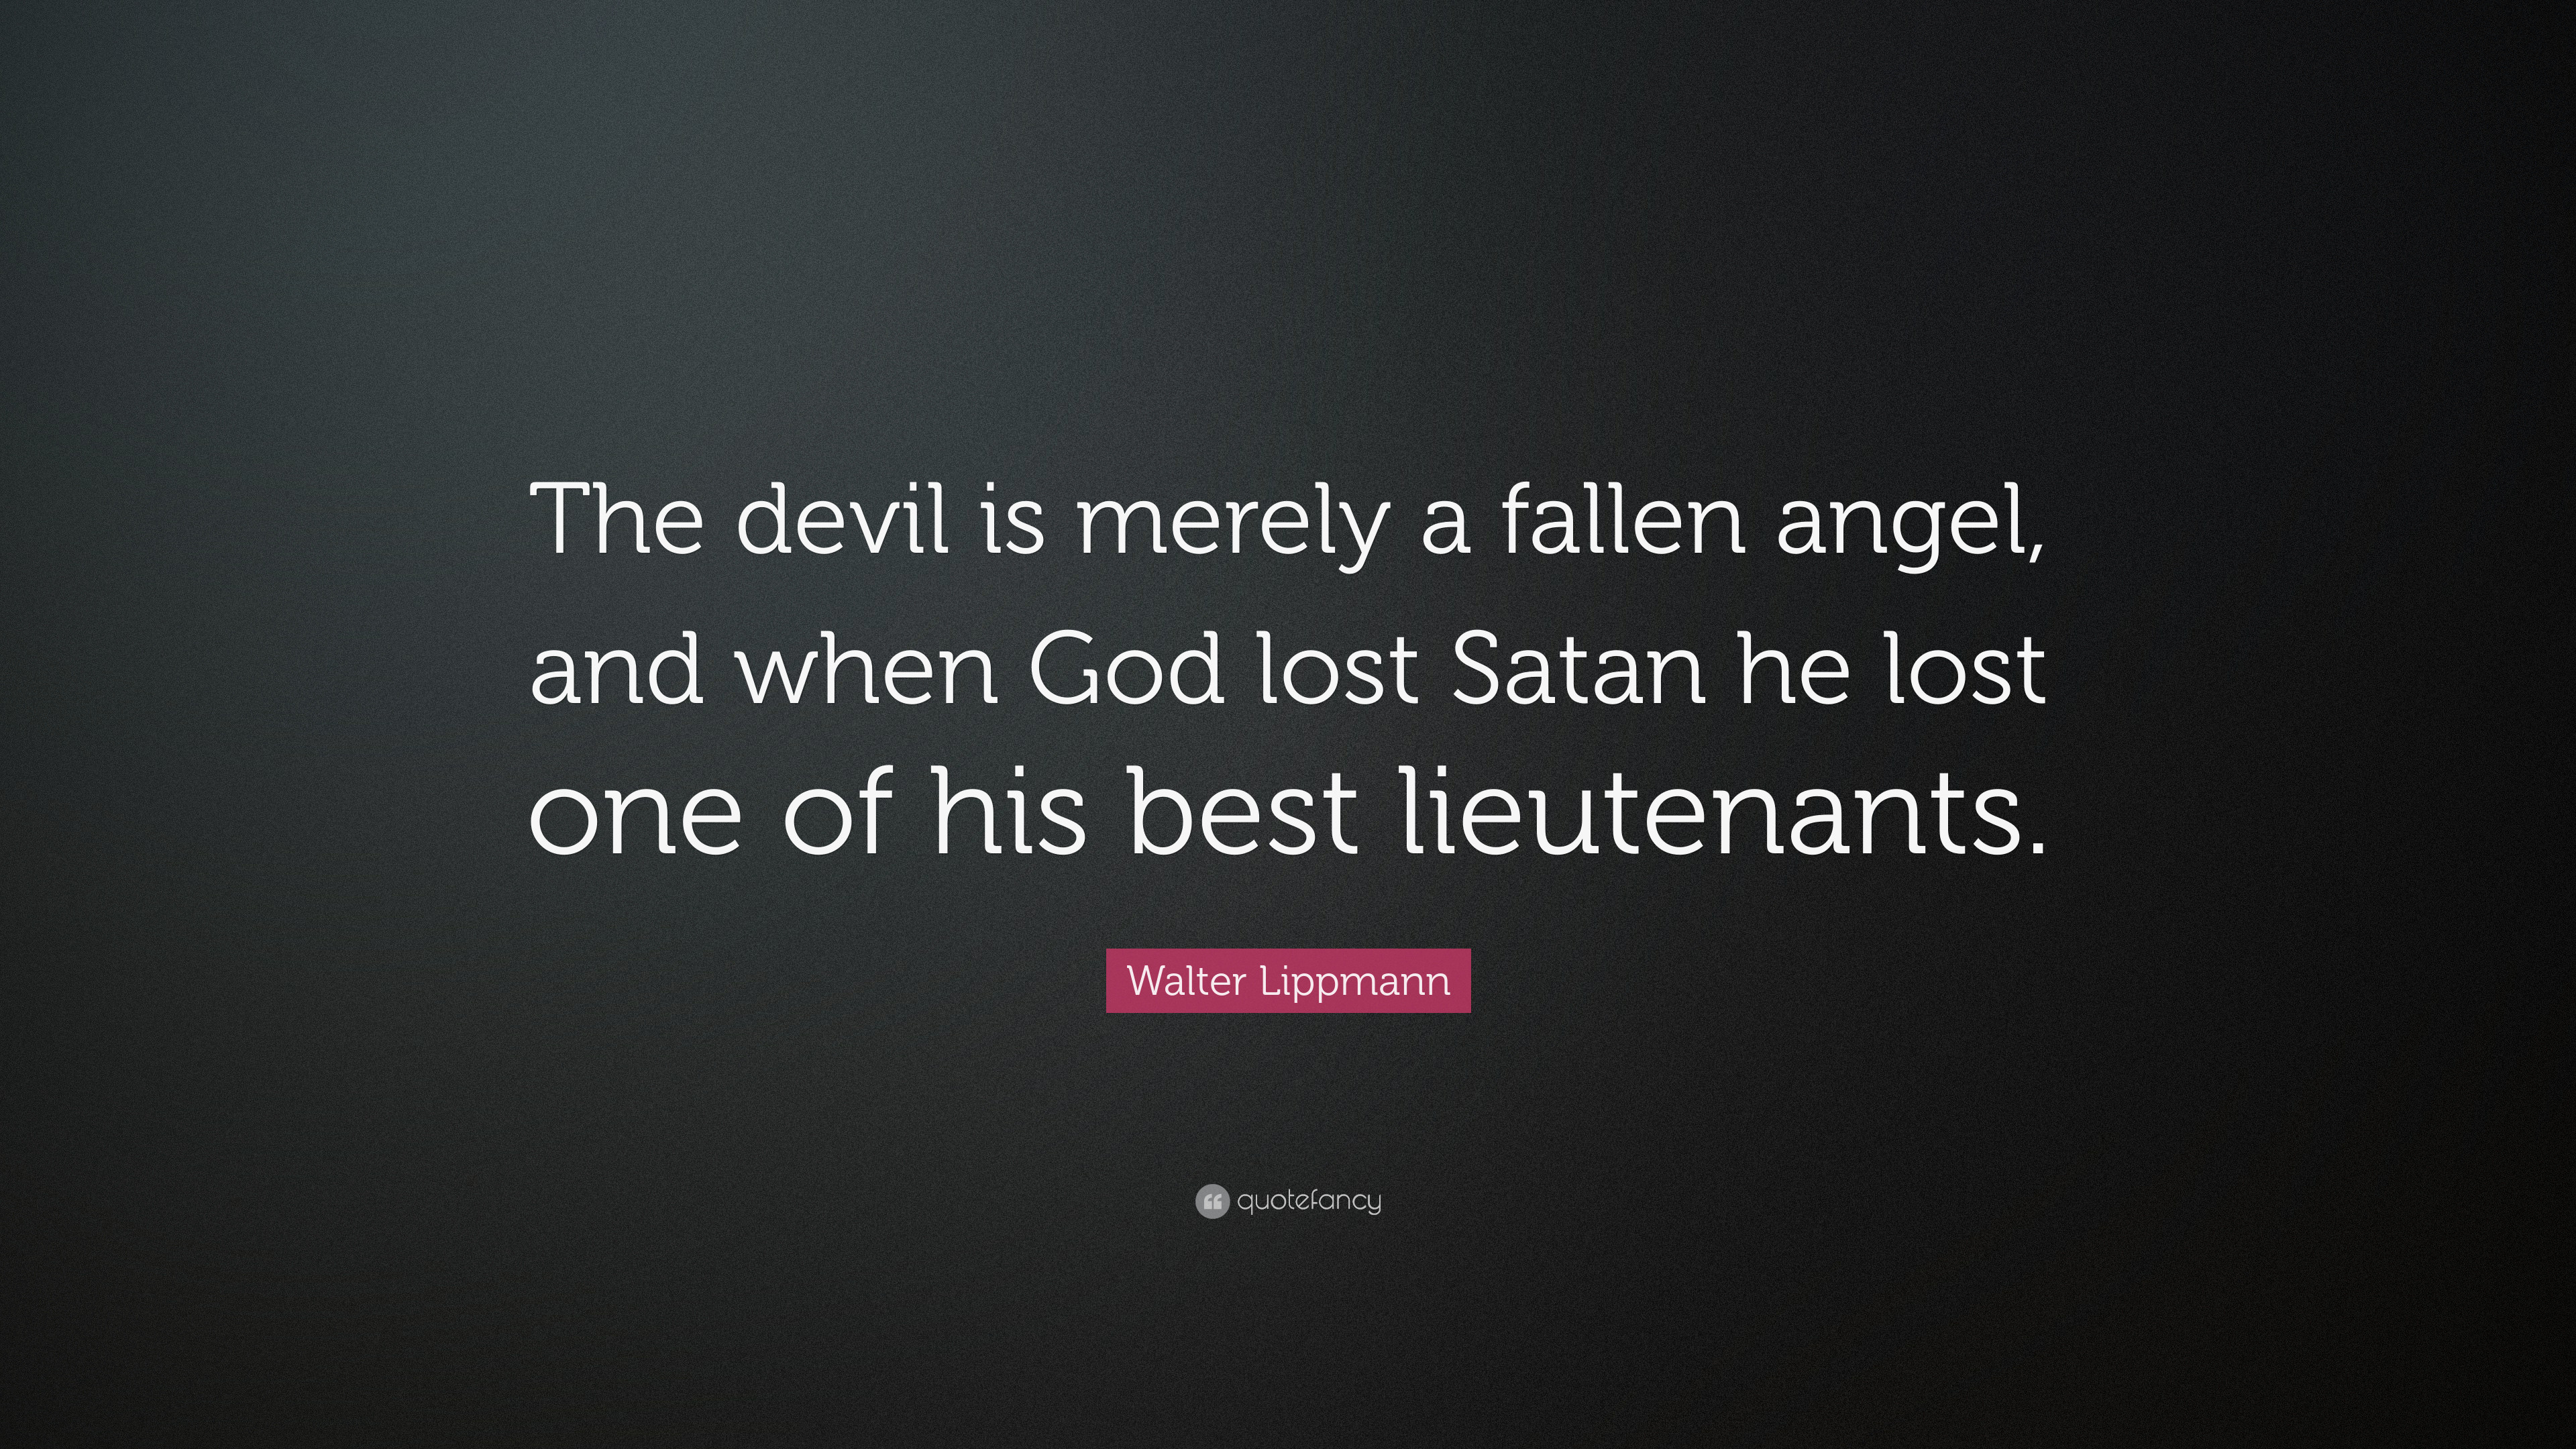 3840x2160 Walter Lippmann Quote: “The devil is merely a fallen angel, and when God